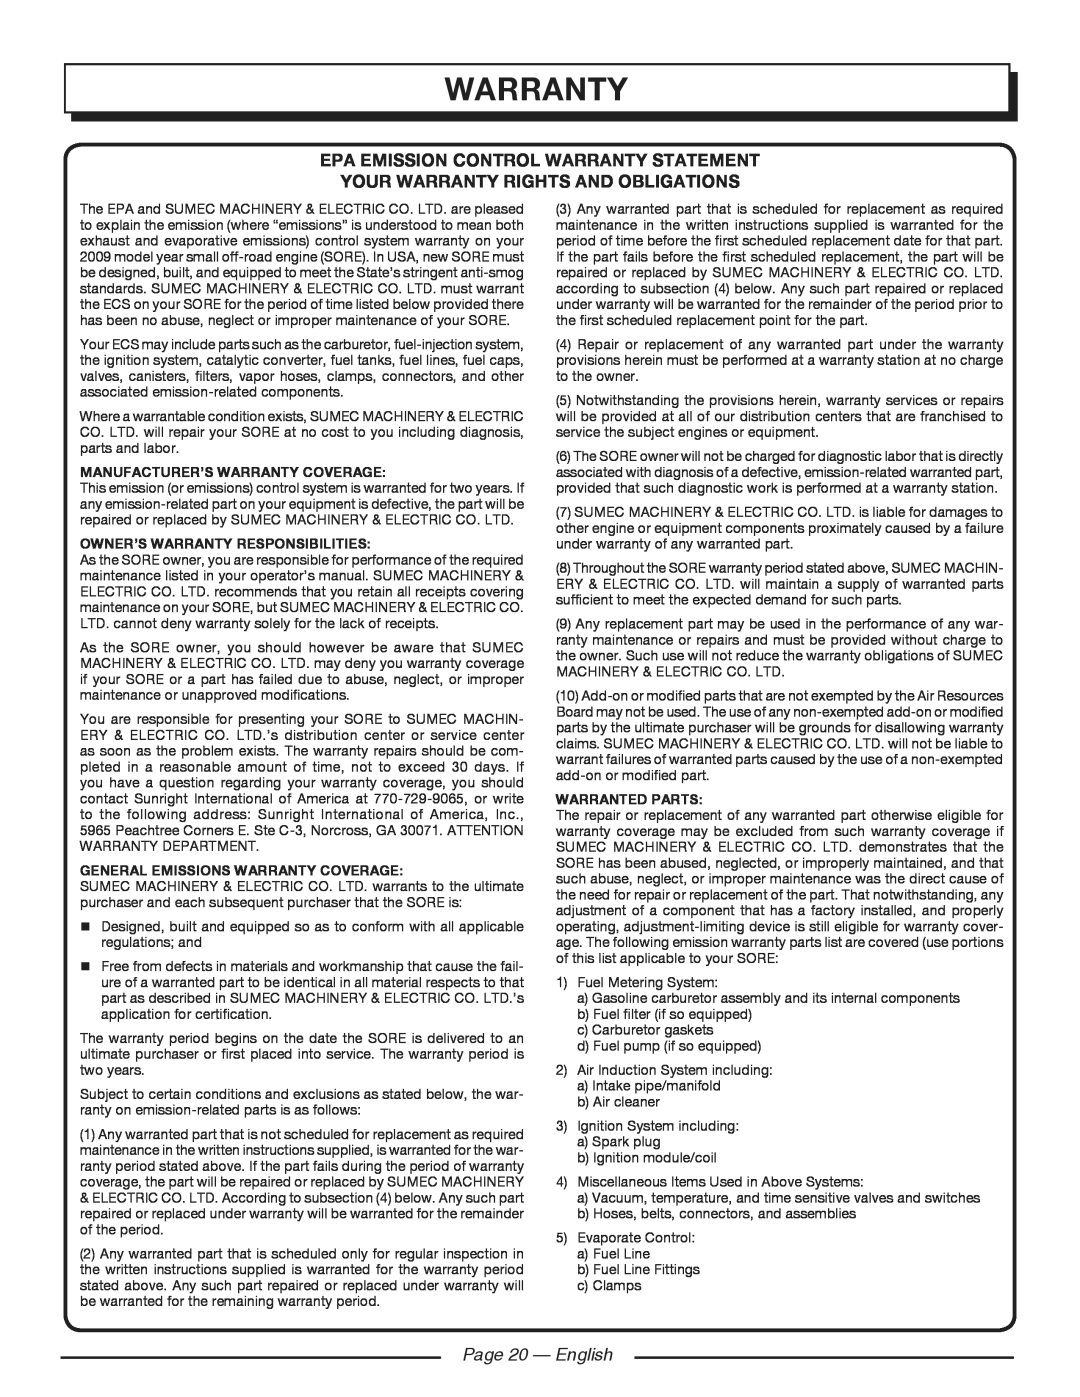 Homelite HGCA3000 Epa Emission Control Warranty Statement, Your Warranty Rights And Obligations, Page 20 - English 